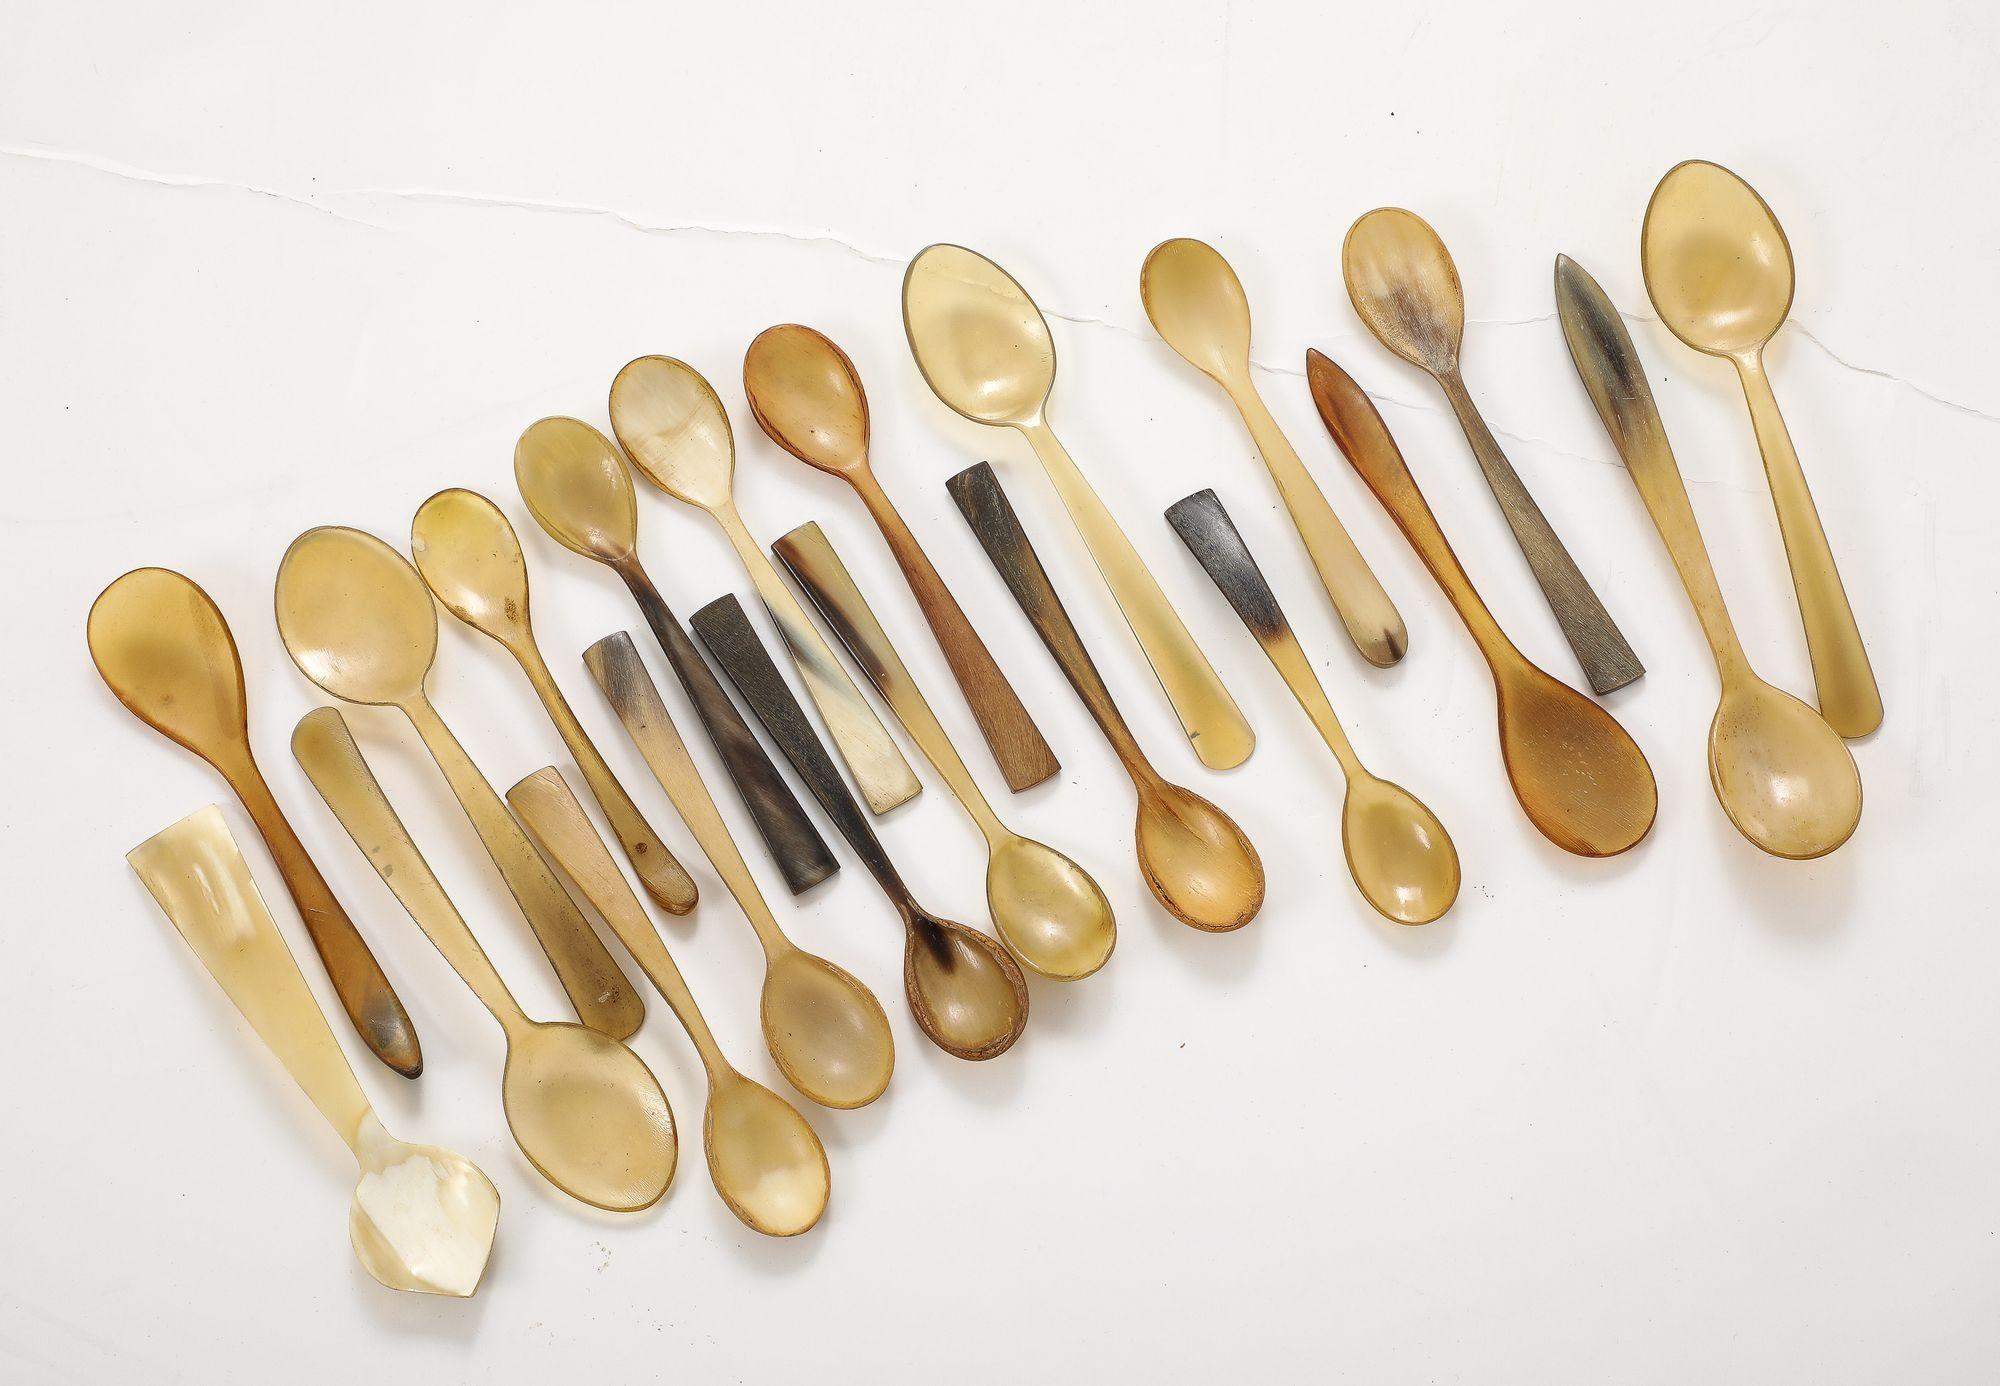 Good collection of English and Scottish horn spoons, 18th and 19th Century, of various shapes, colors and sizes.
size listed below is approximate/average